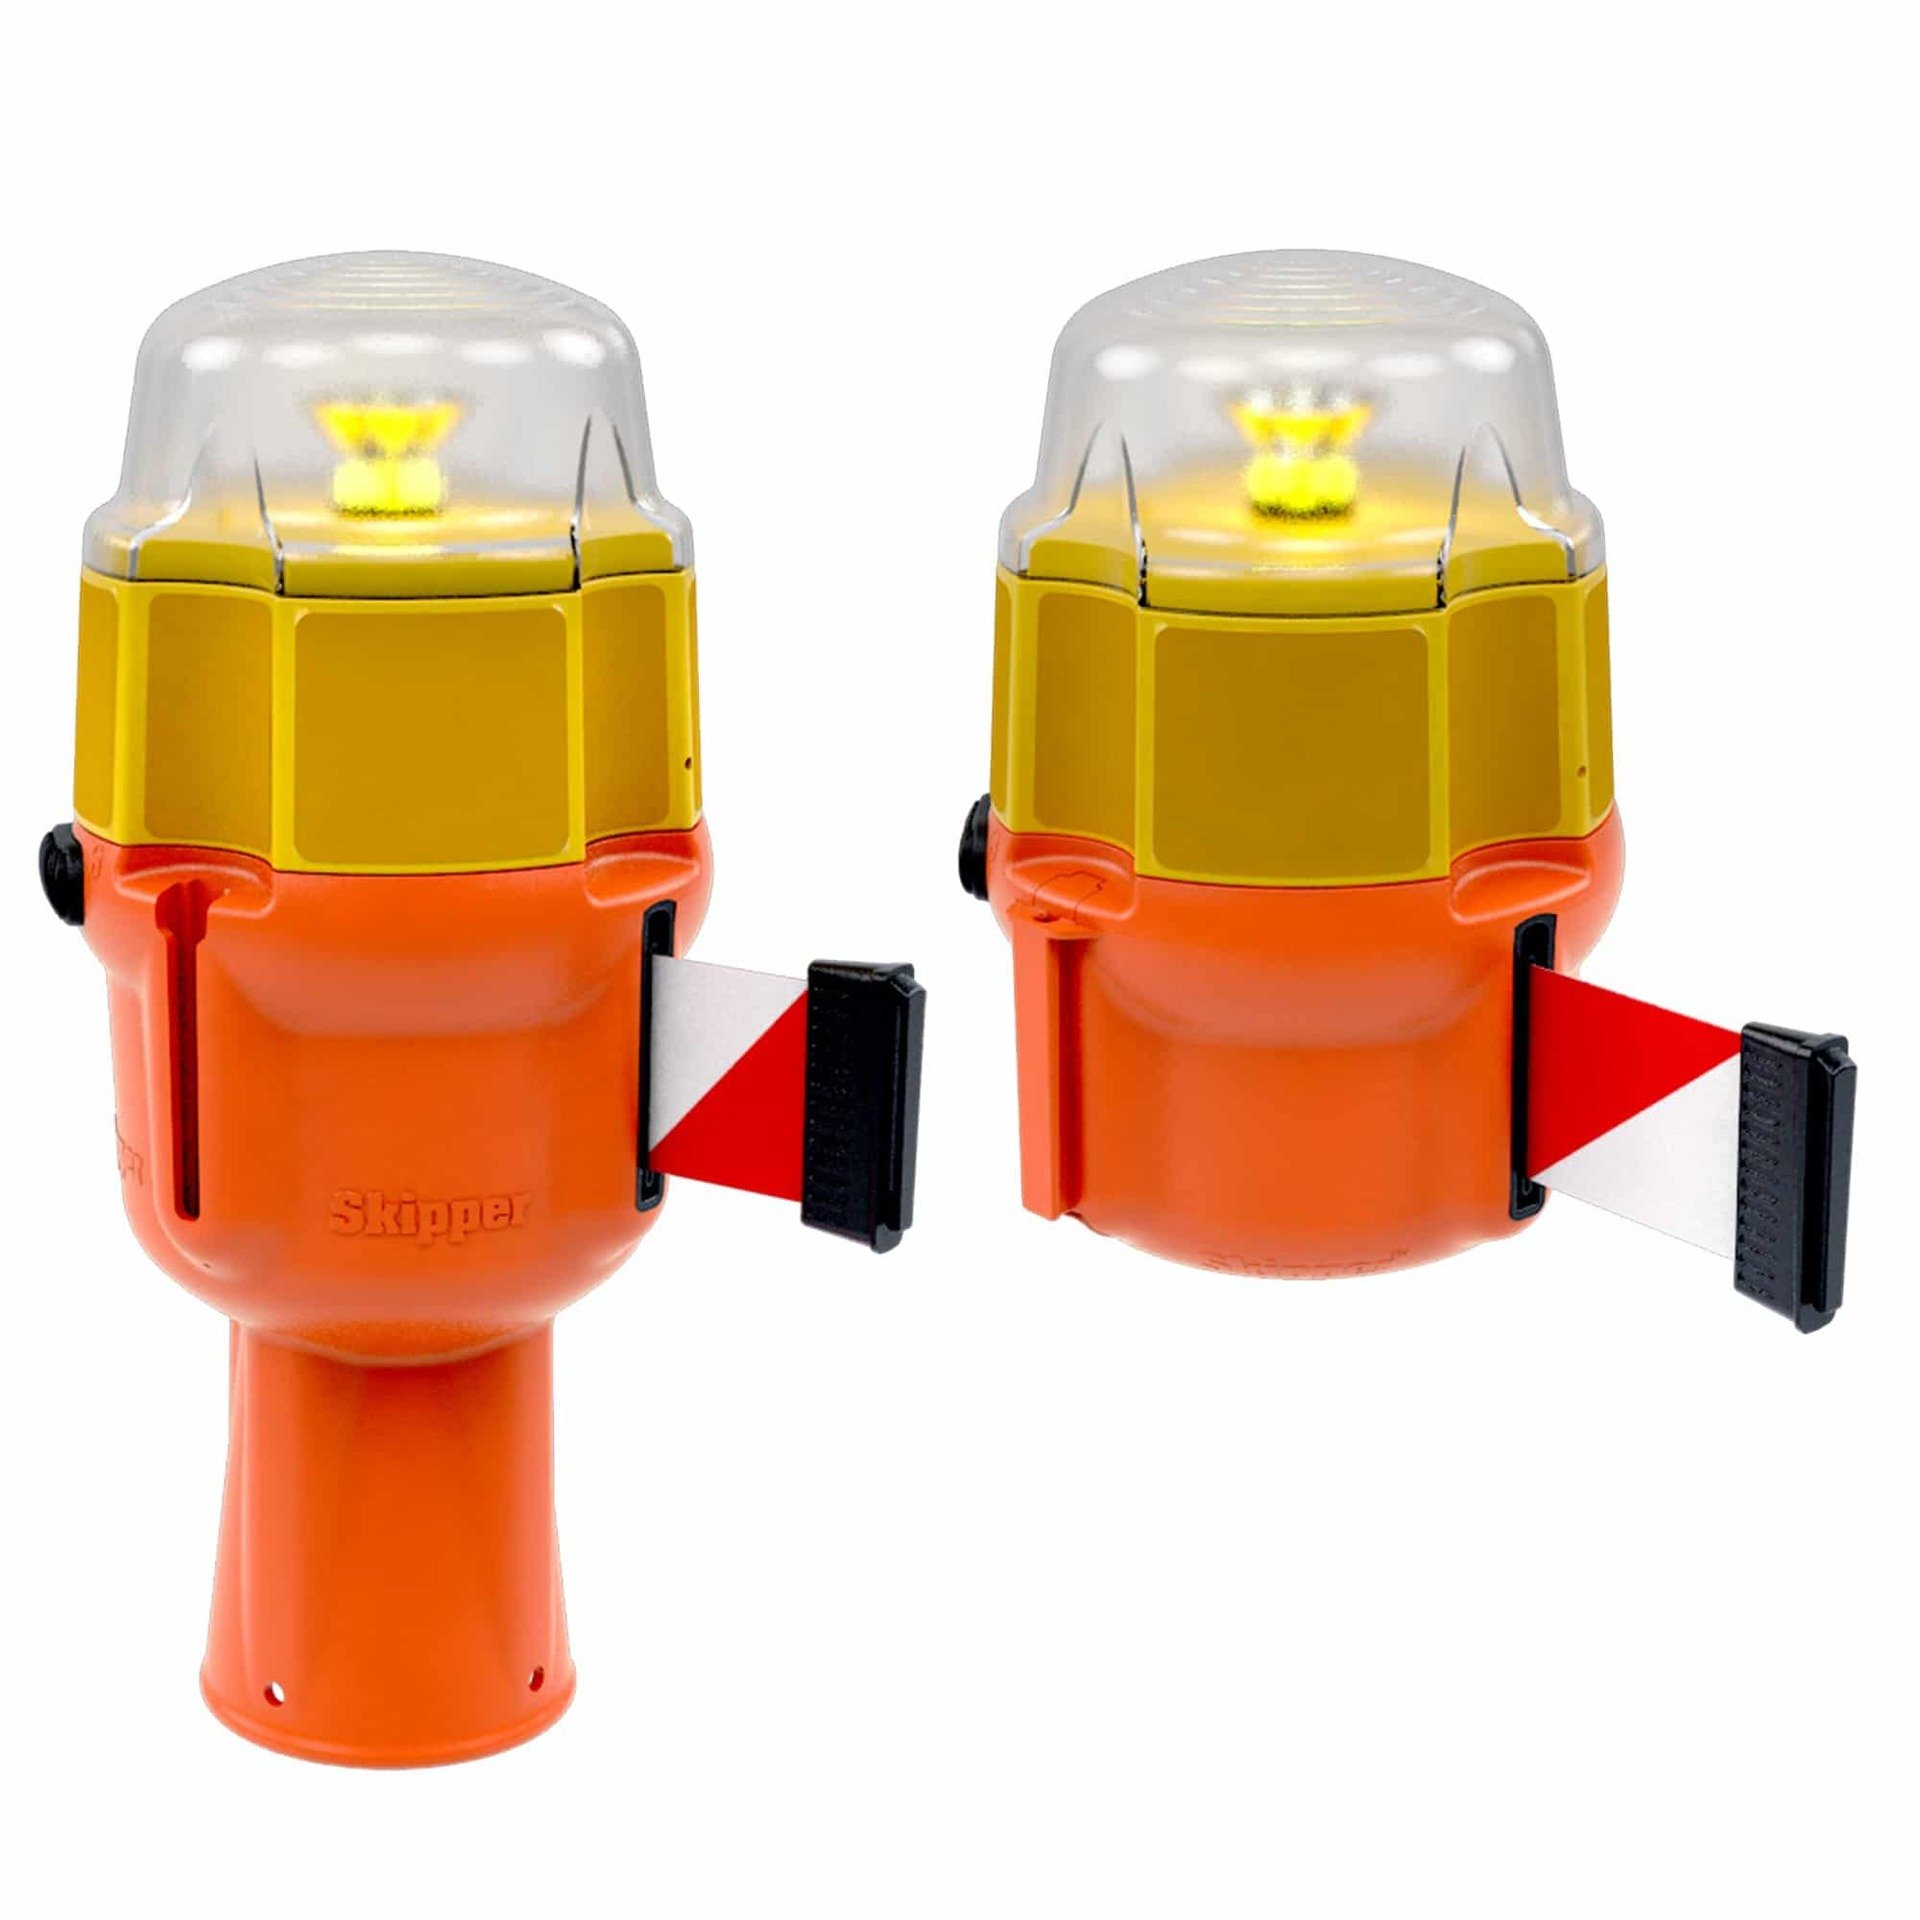 Rechargeable LED light for barriers and cones